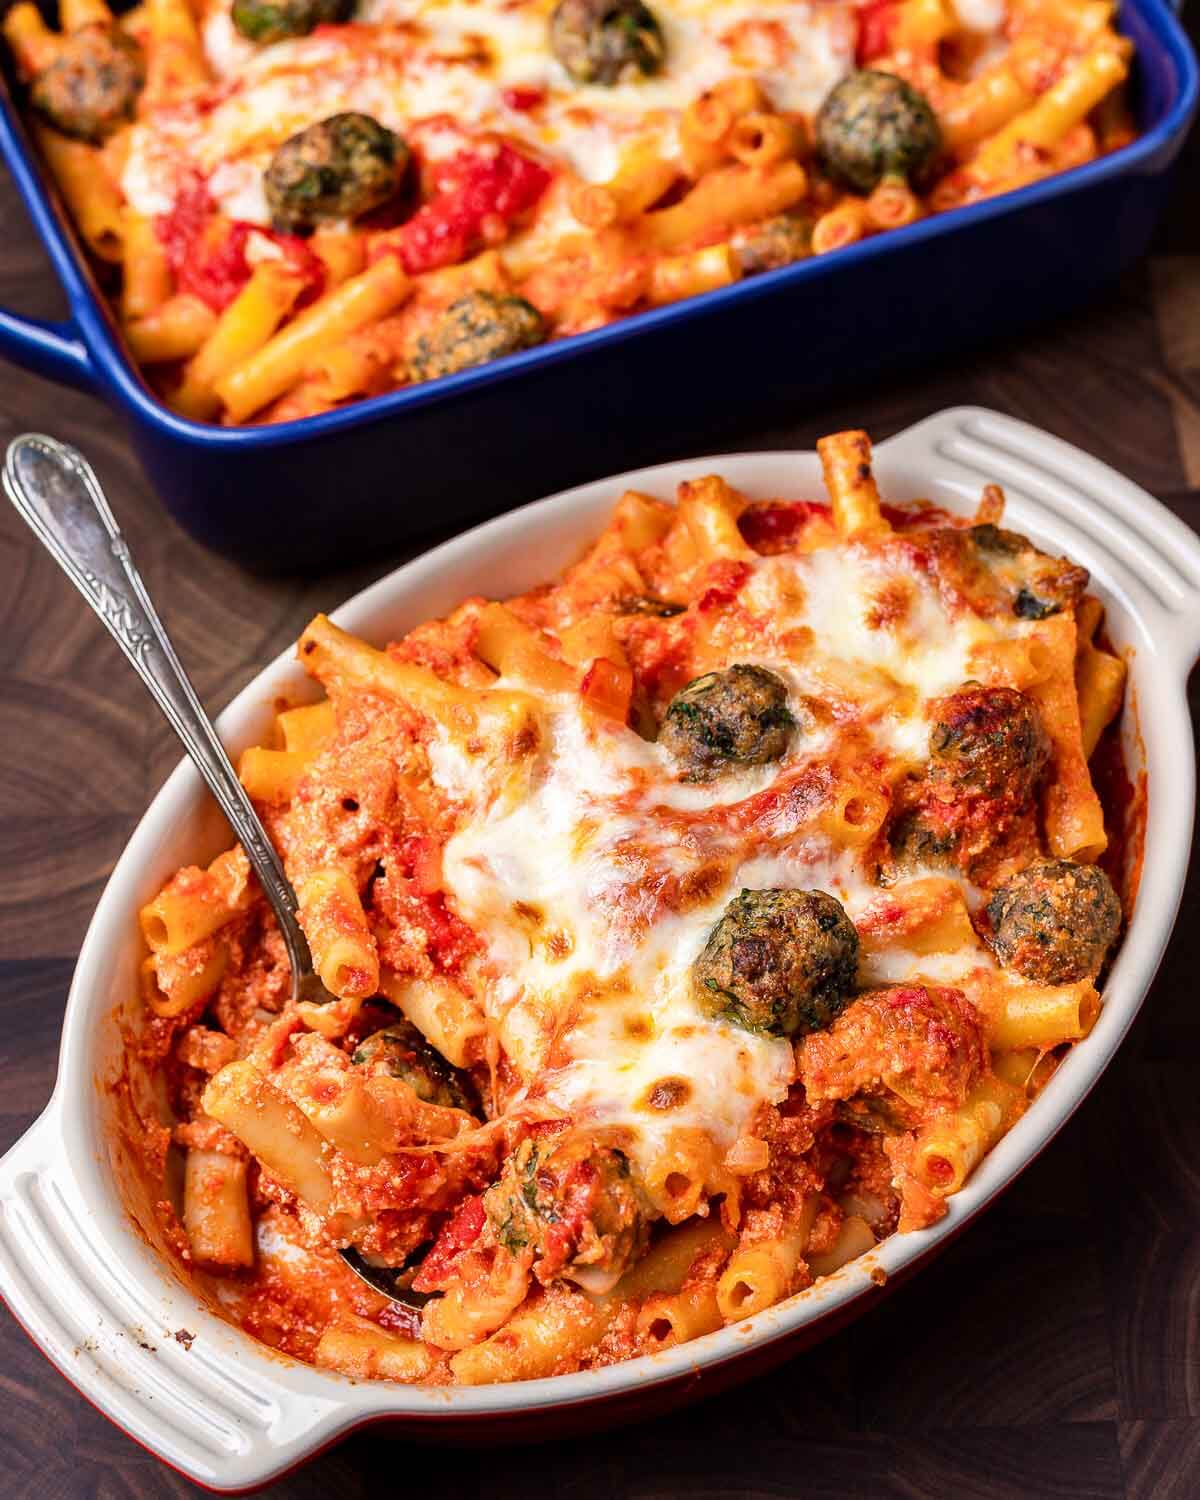 Baked ziti with meatballs in two baking dishes on walnut cutting board.